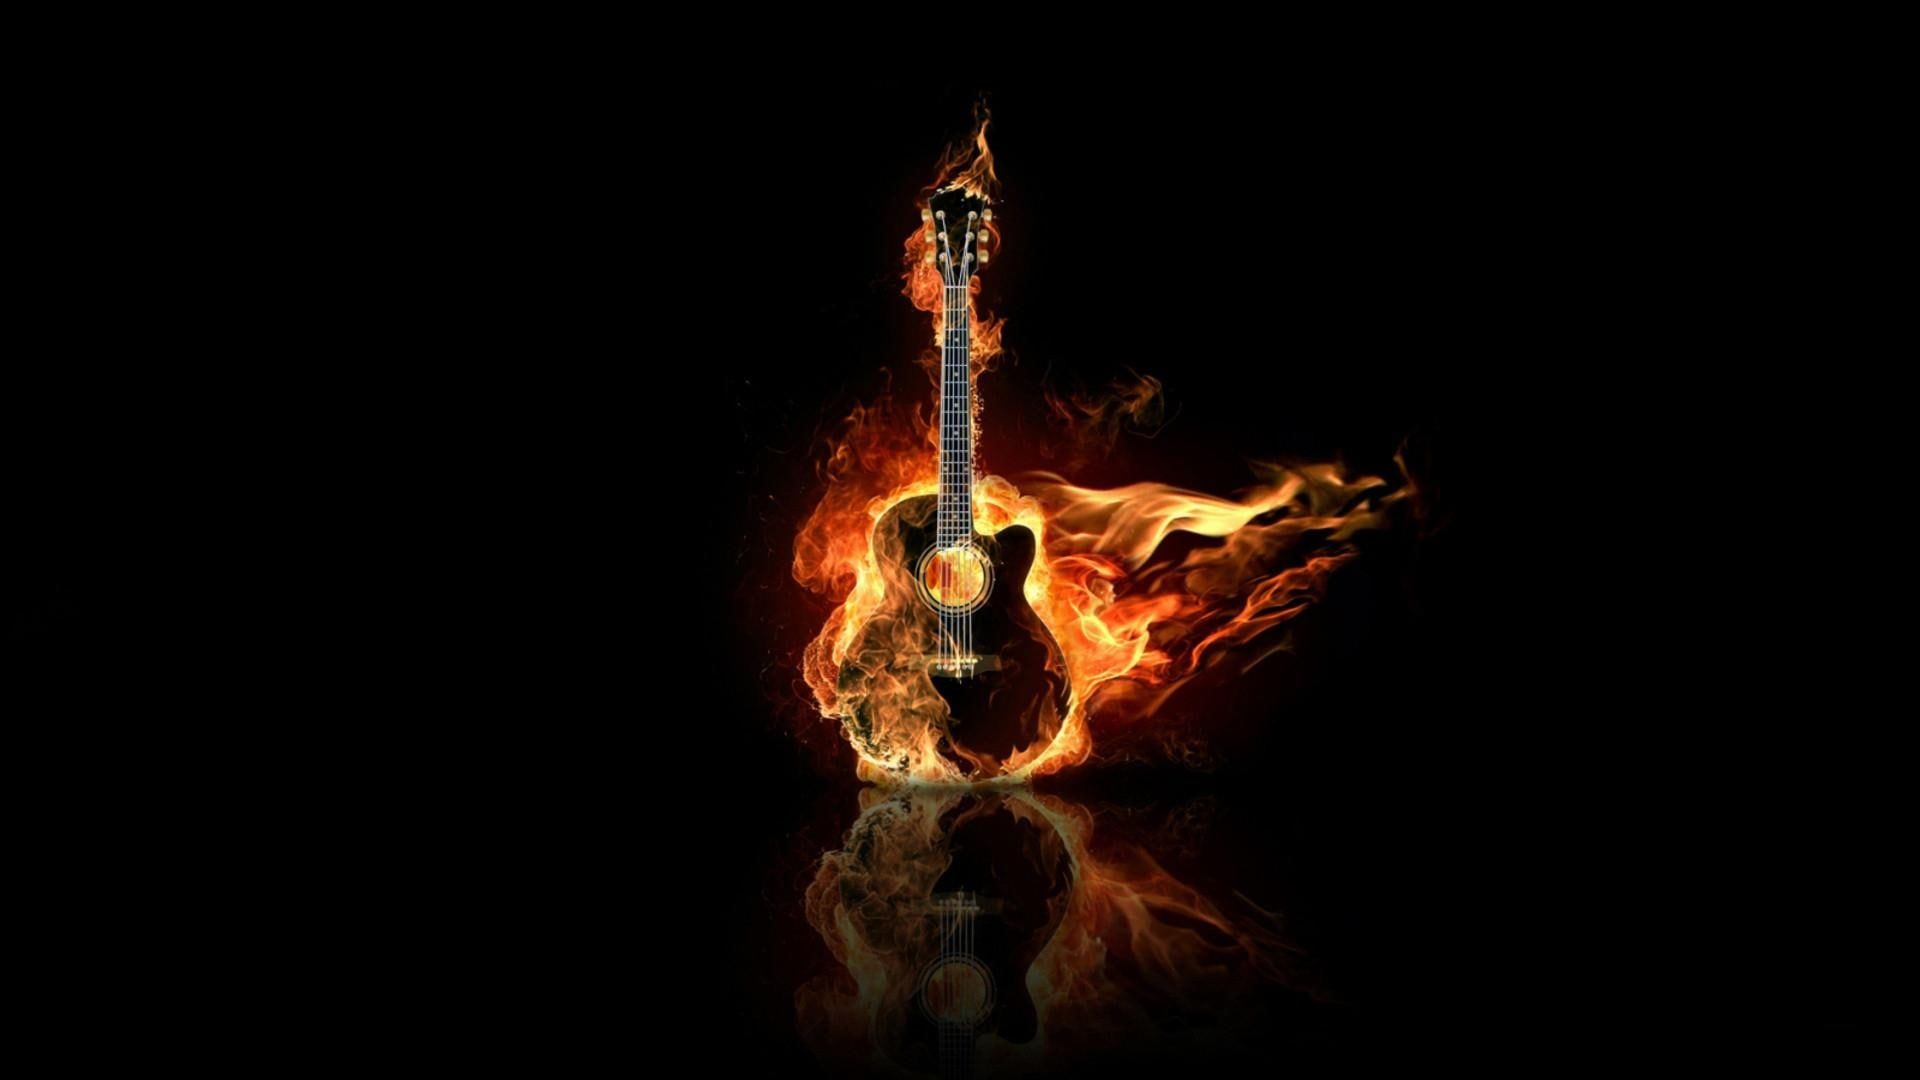 Guitar on Fire, Fiery passion, Explosive music, Captivating performance, 1920x1080 Full HD Desktop